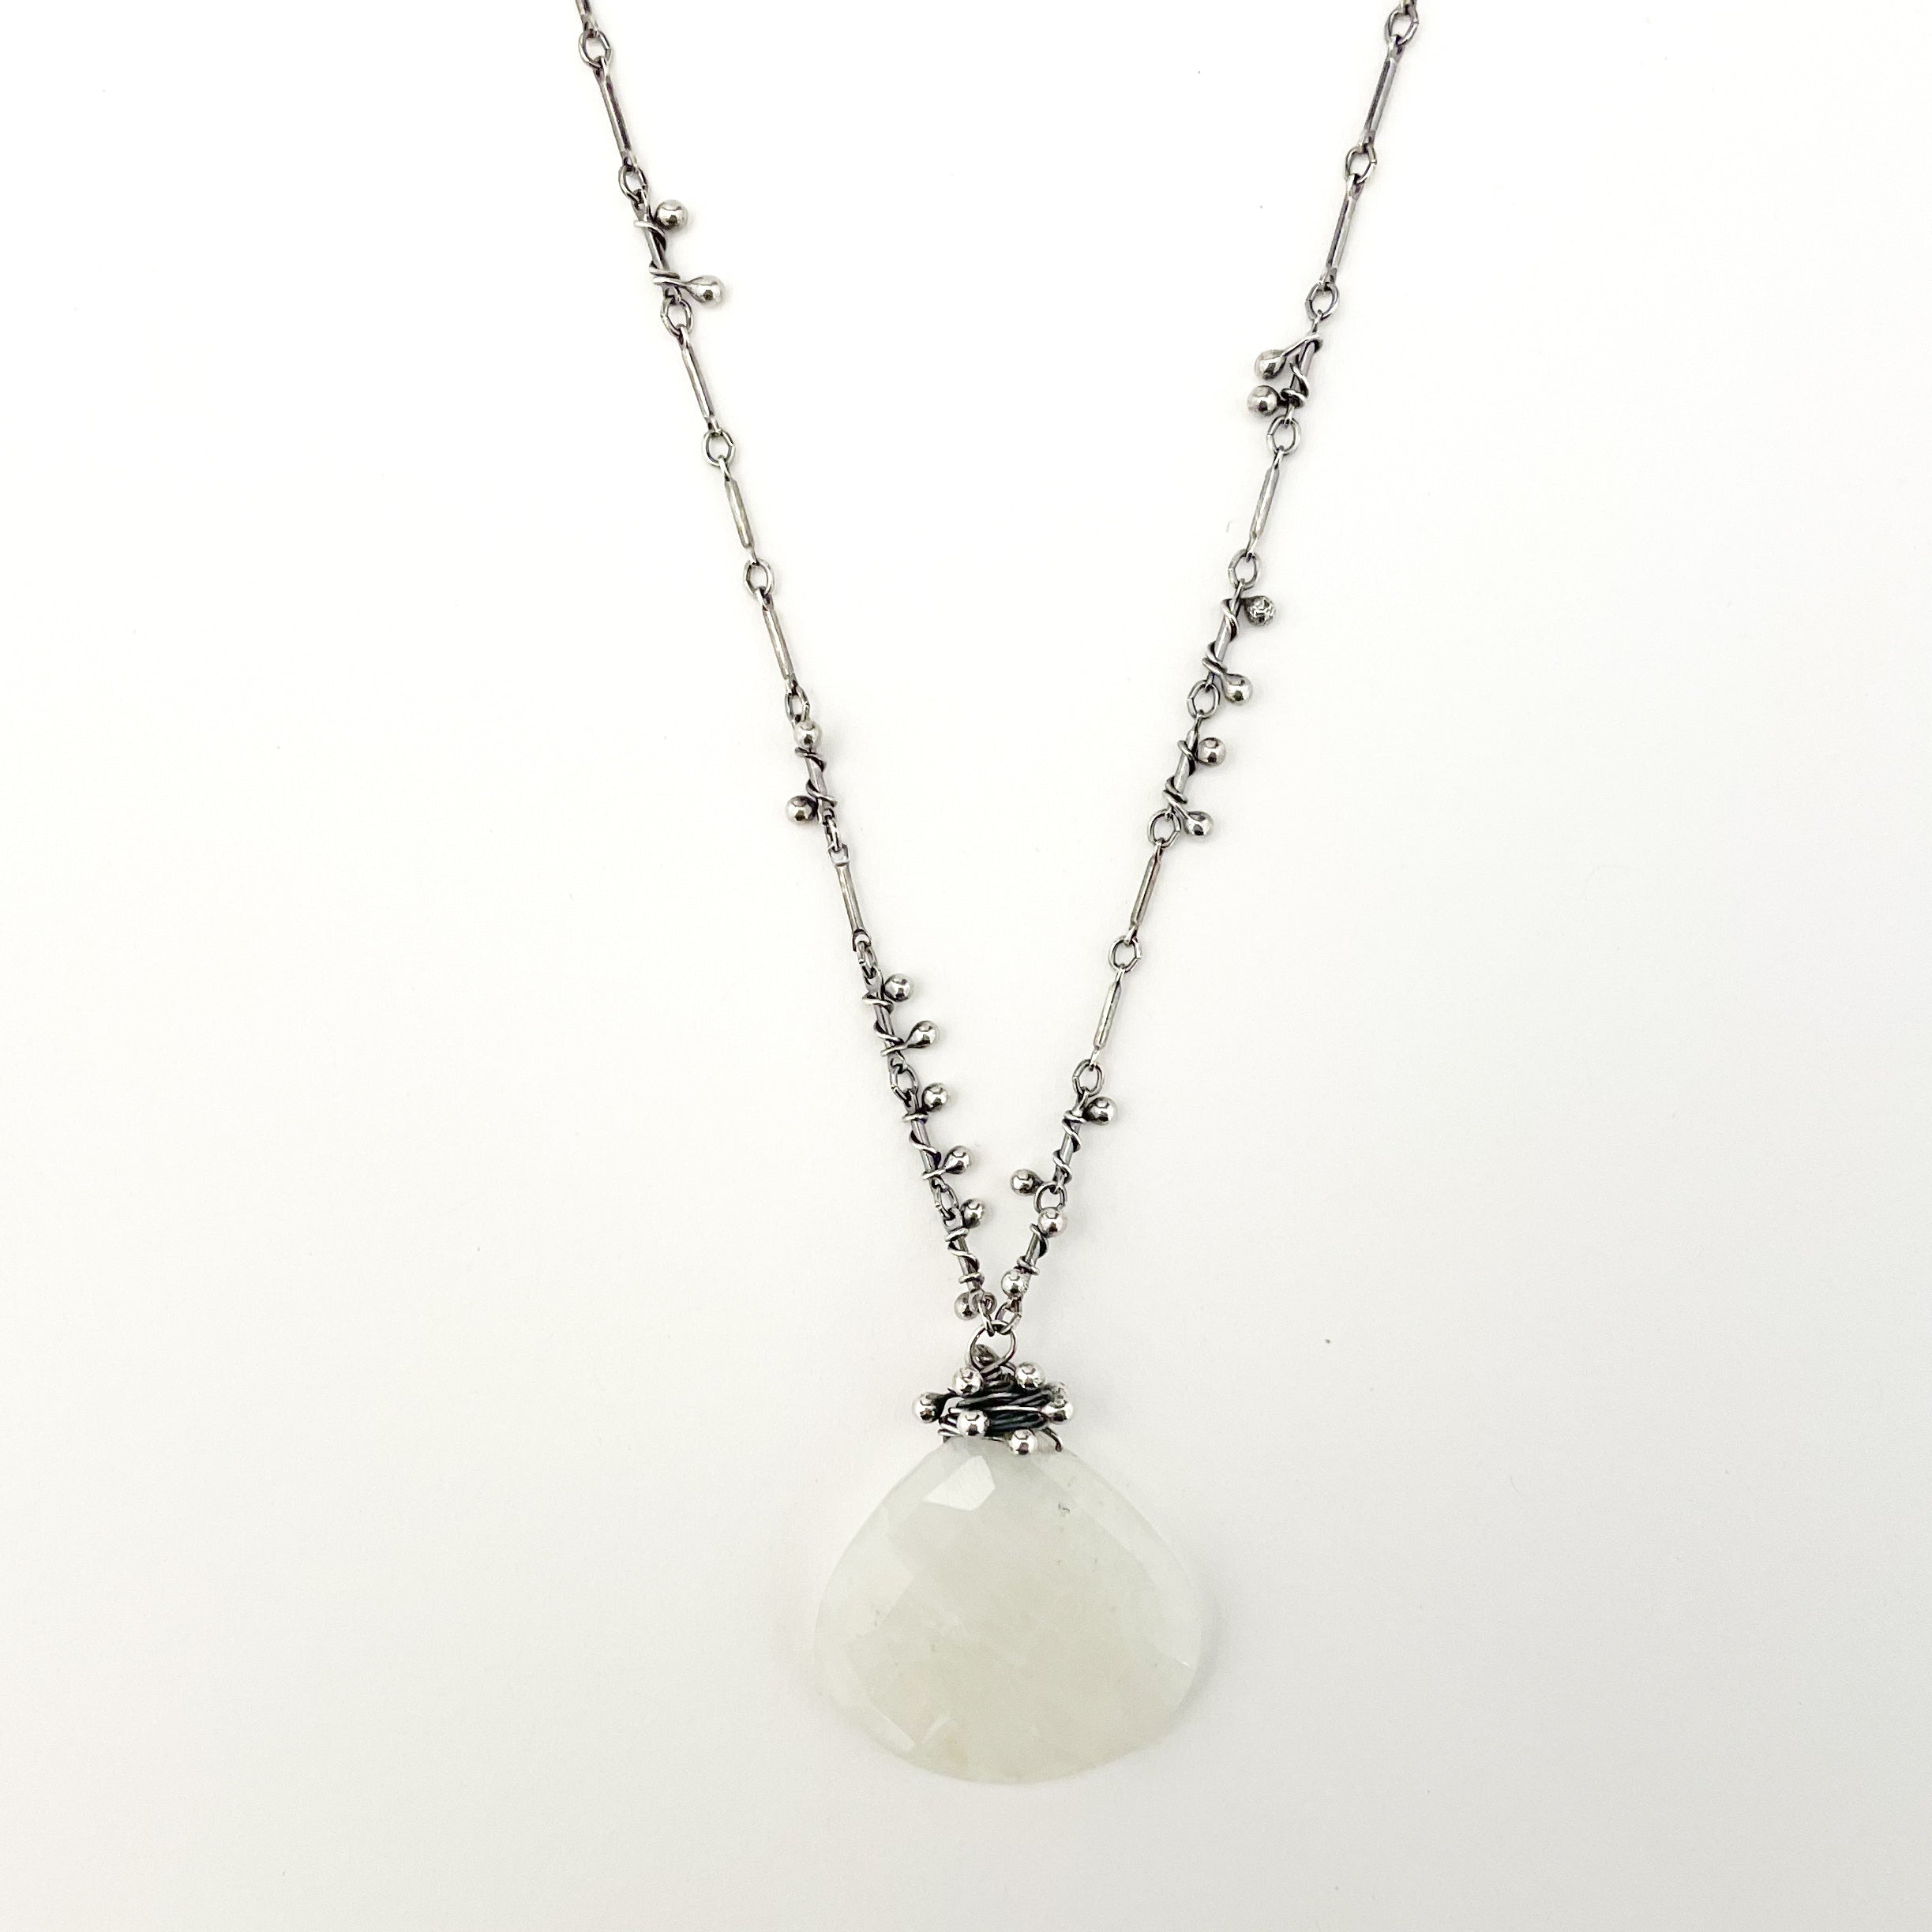 STERLING SILVER SWARM NECKLACE-MOONSTONE